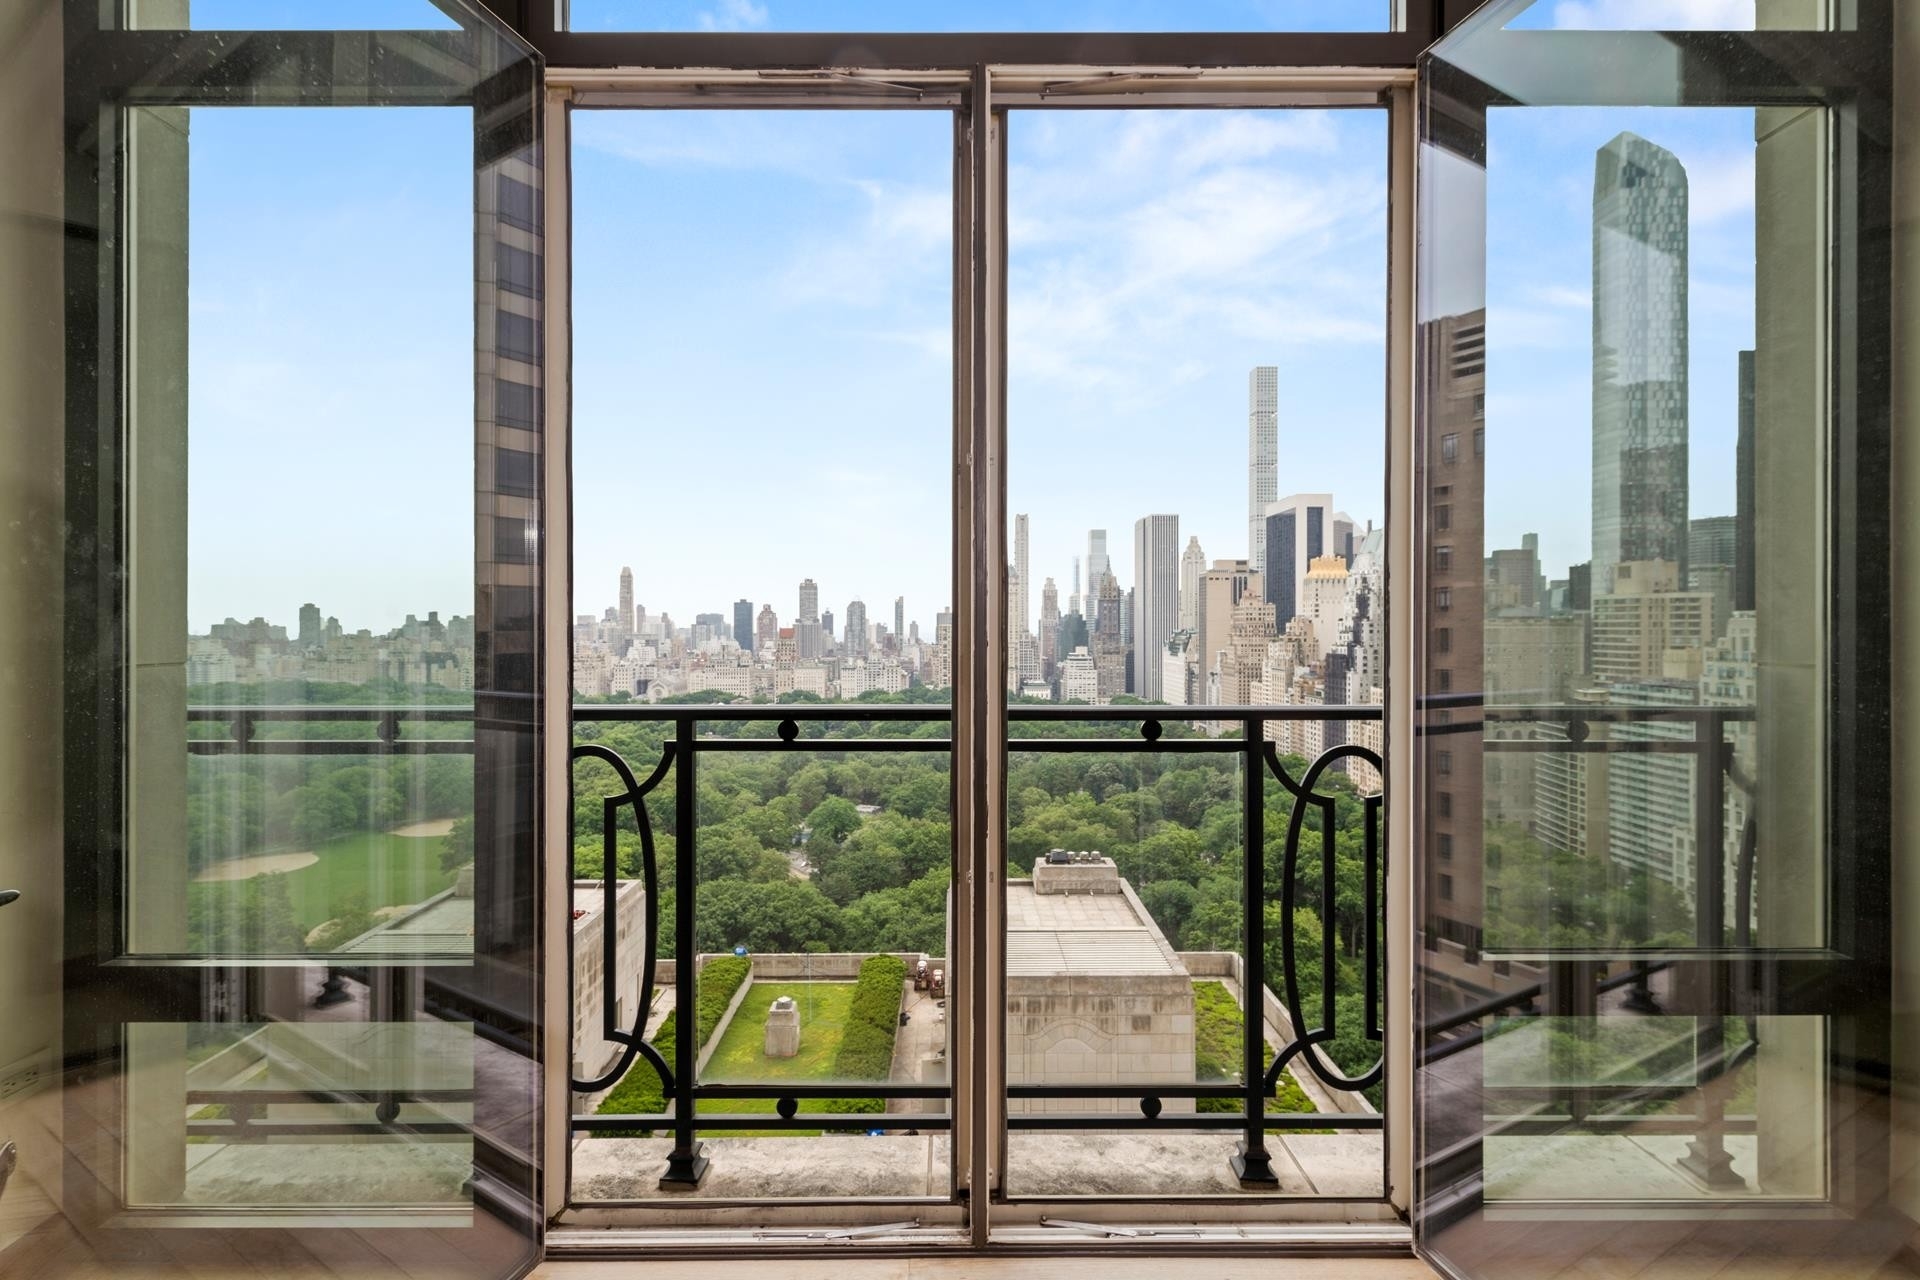 Property at 15 Cpw, 15 CENTRAL PARK W, 26B Lincoln Square, New York, NY 10023